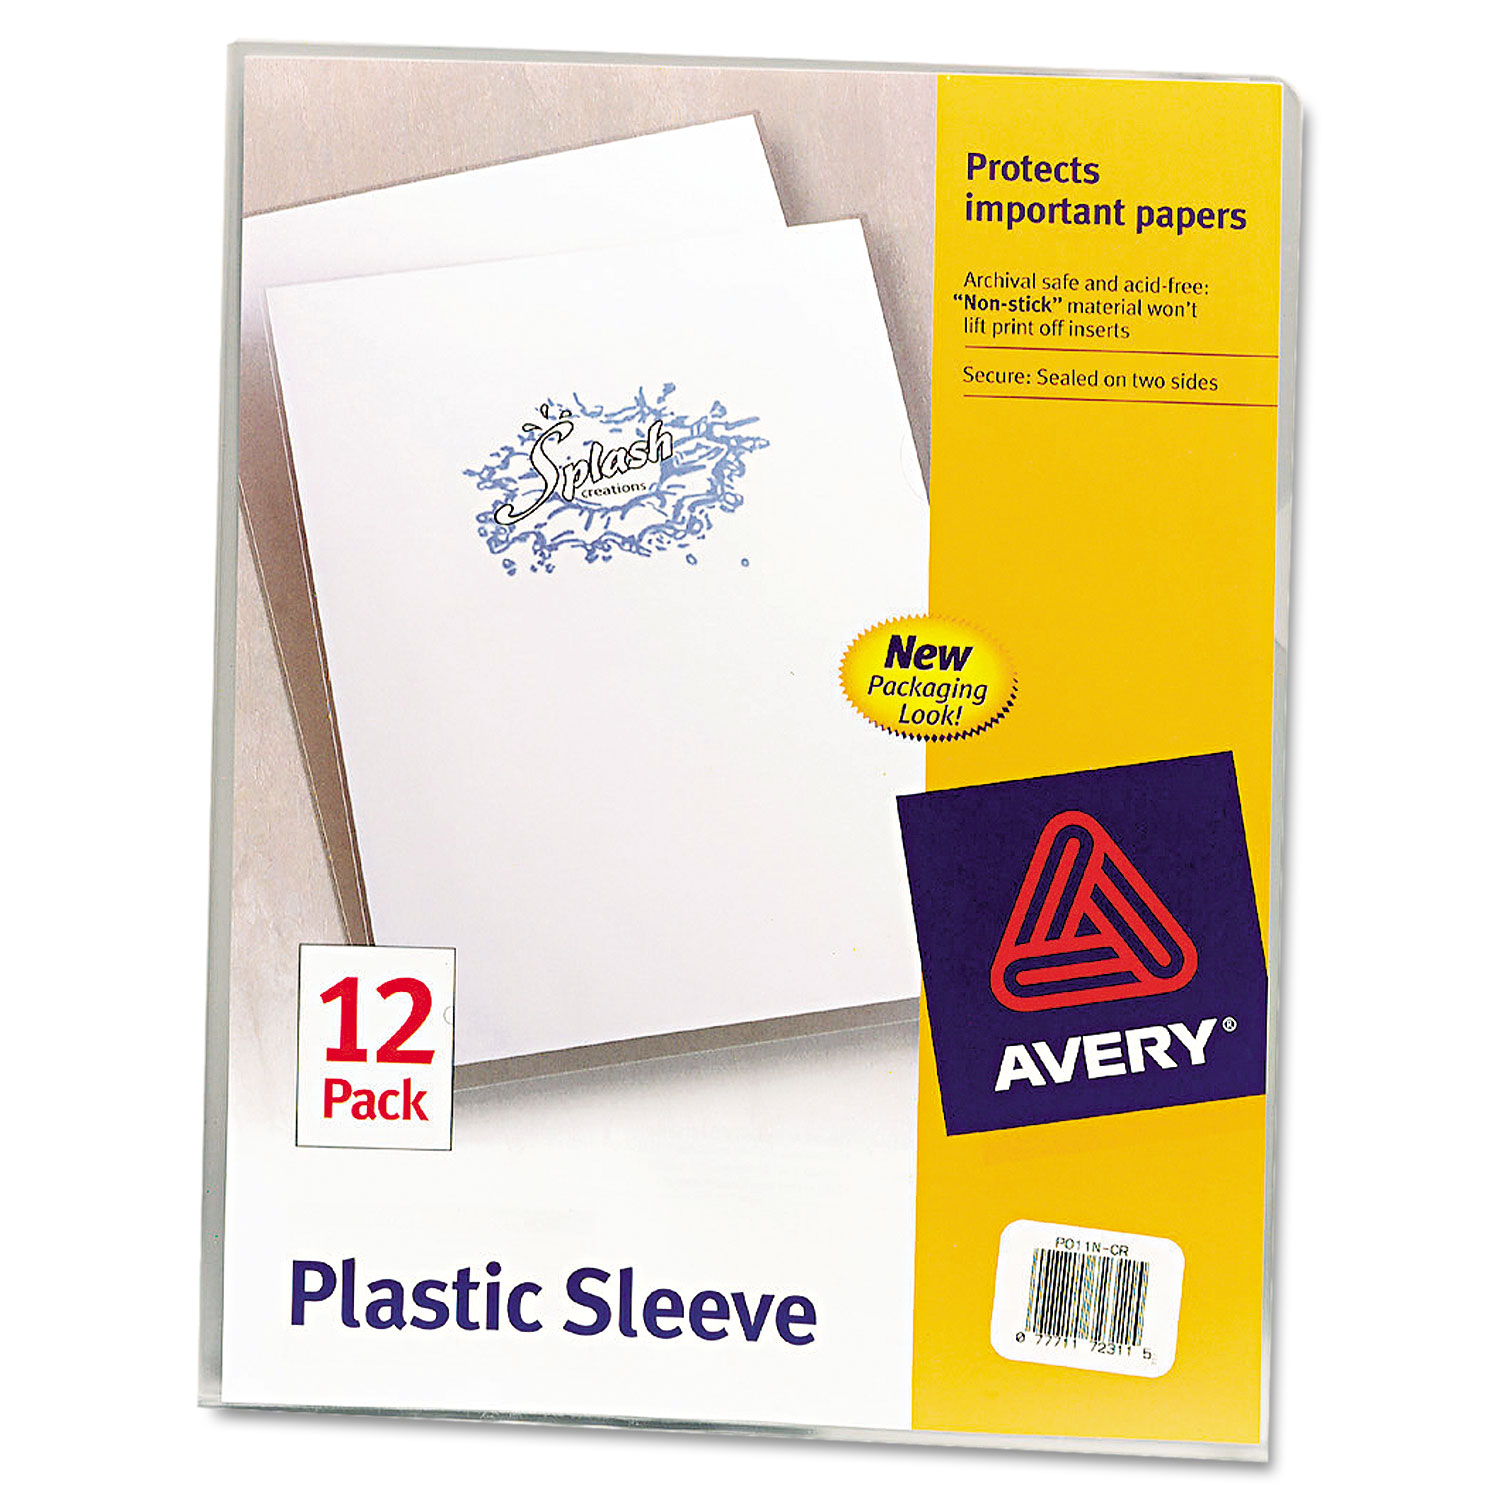  Avery 72311 Clear Plastic Sleeves, Letter Size, Clear, 12/Pack (AVE72311) 